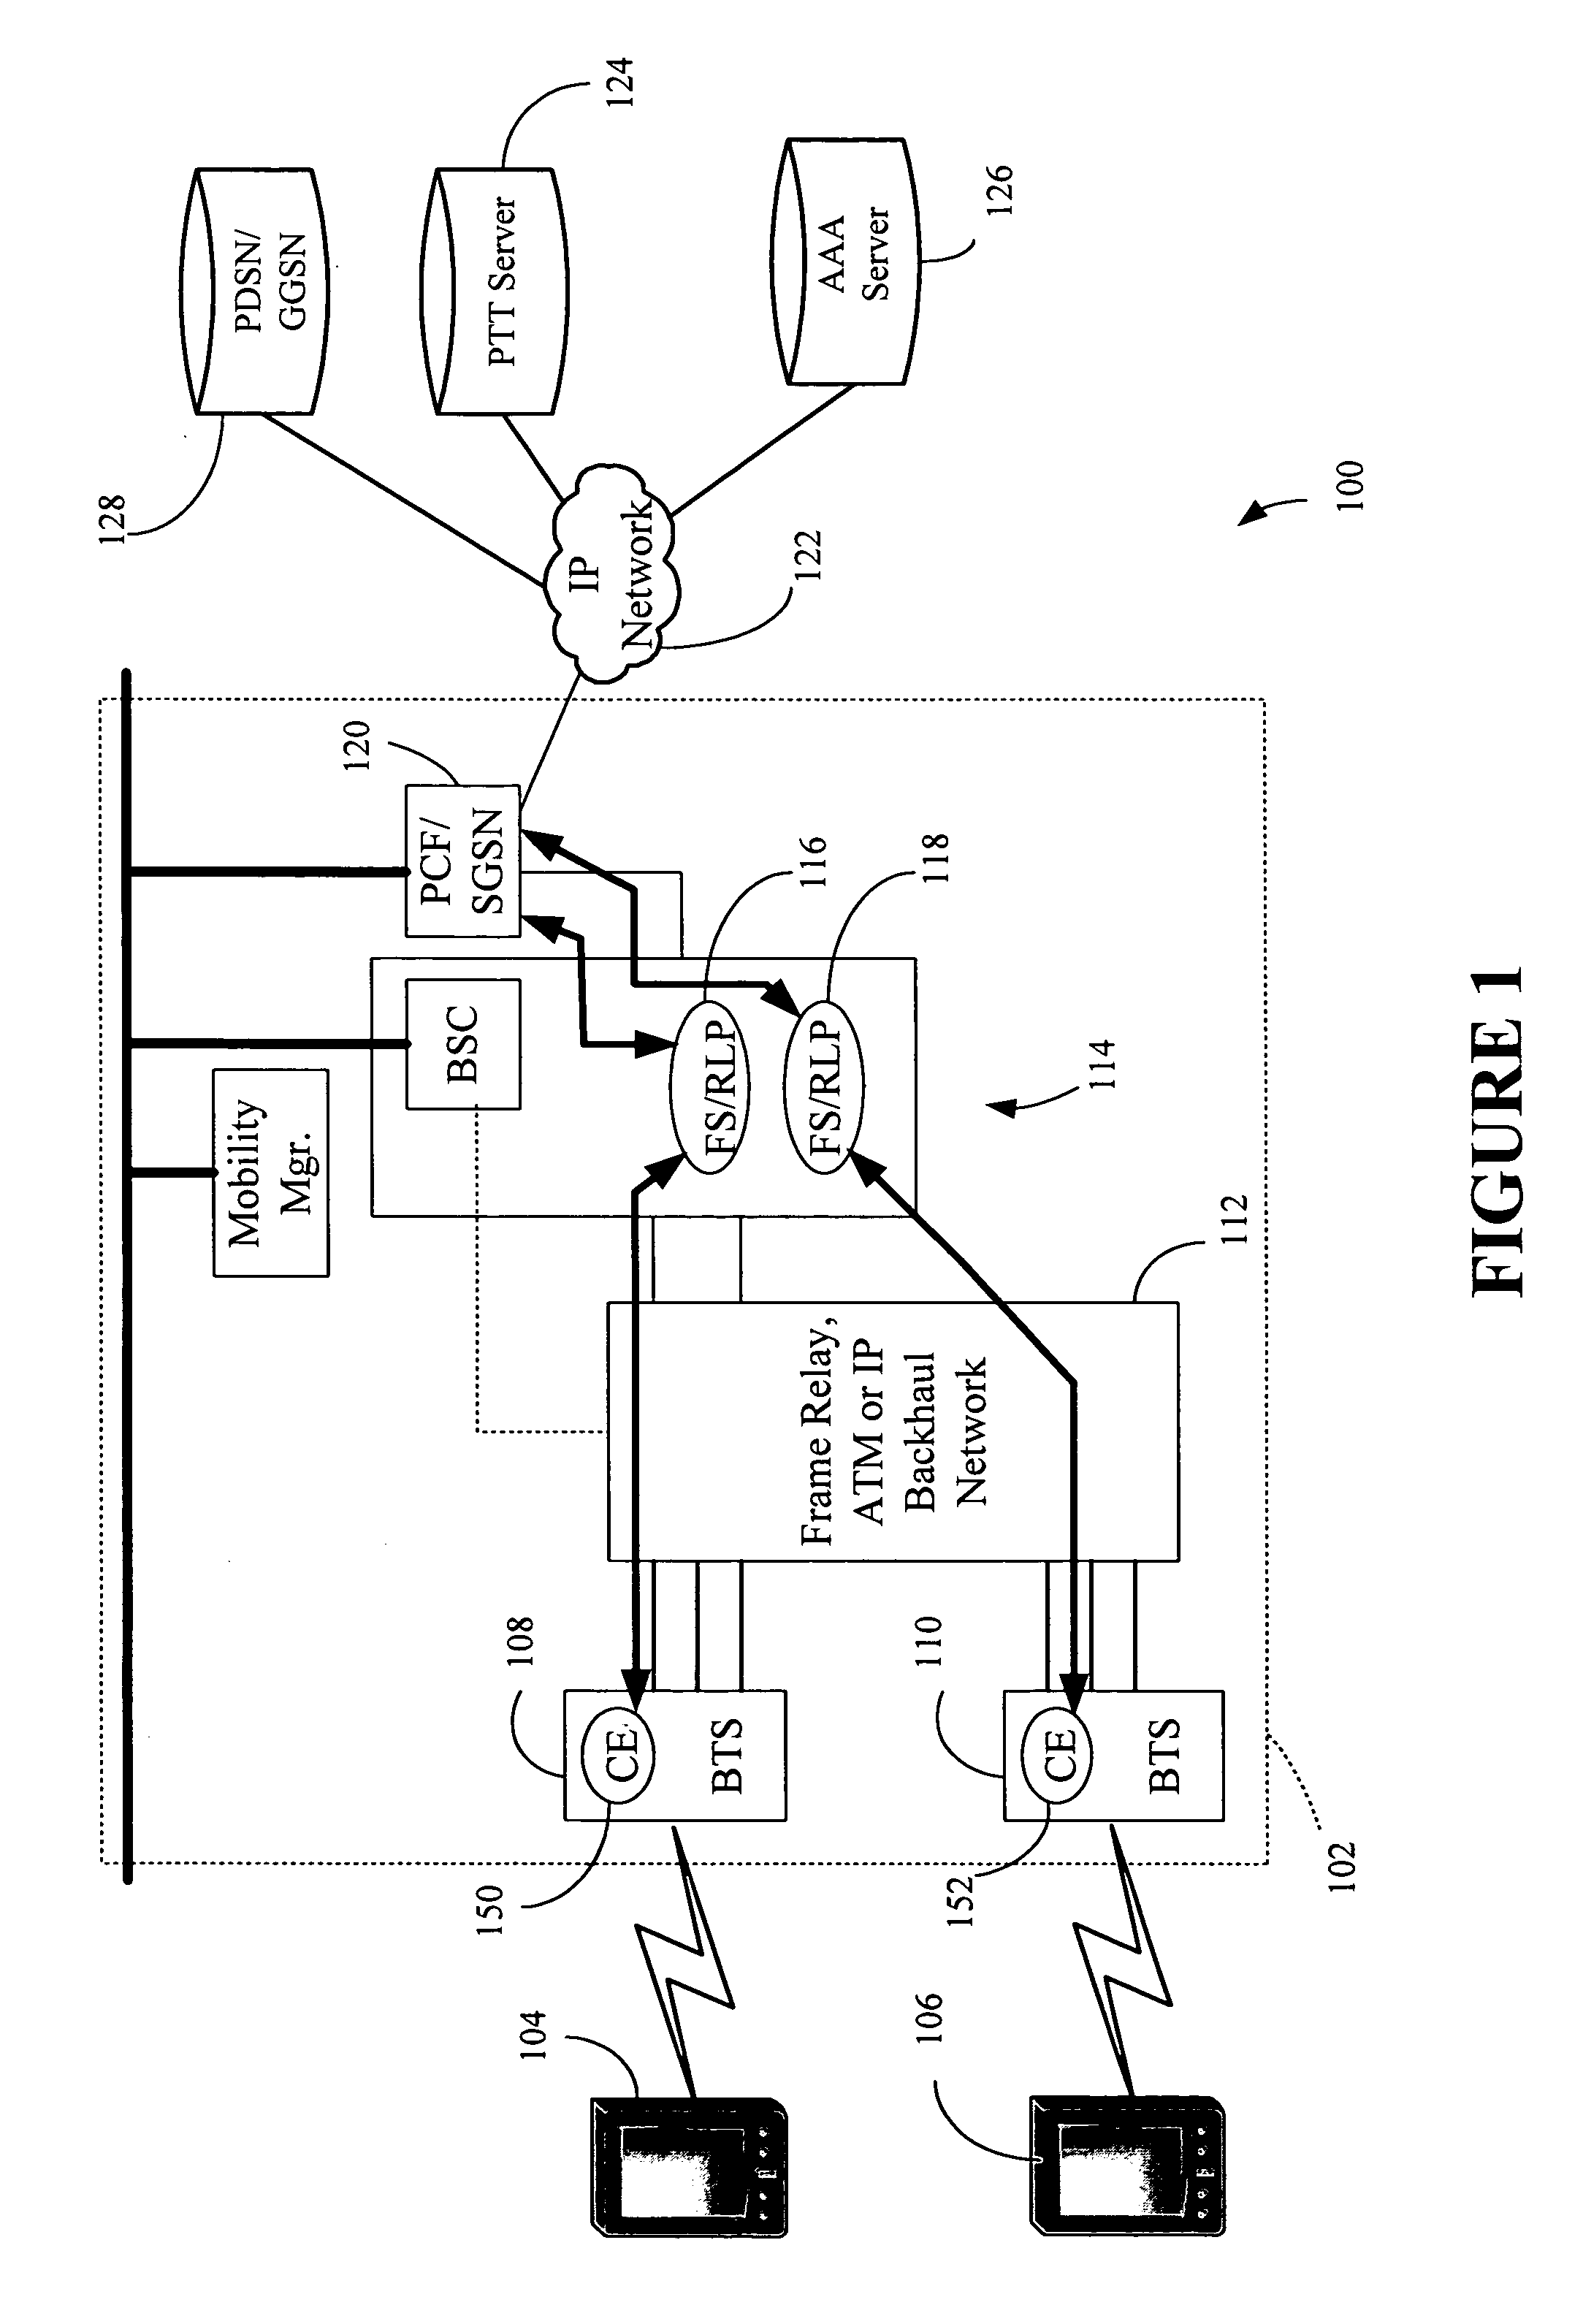 Method and apparatus for reducing transport delay in a push-to-talk system